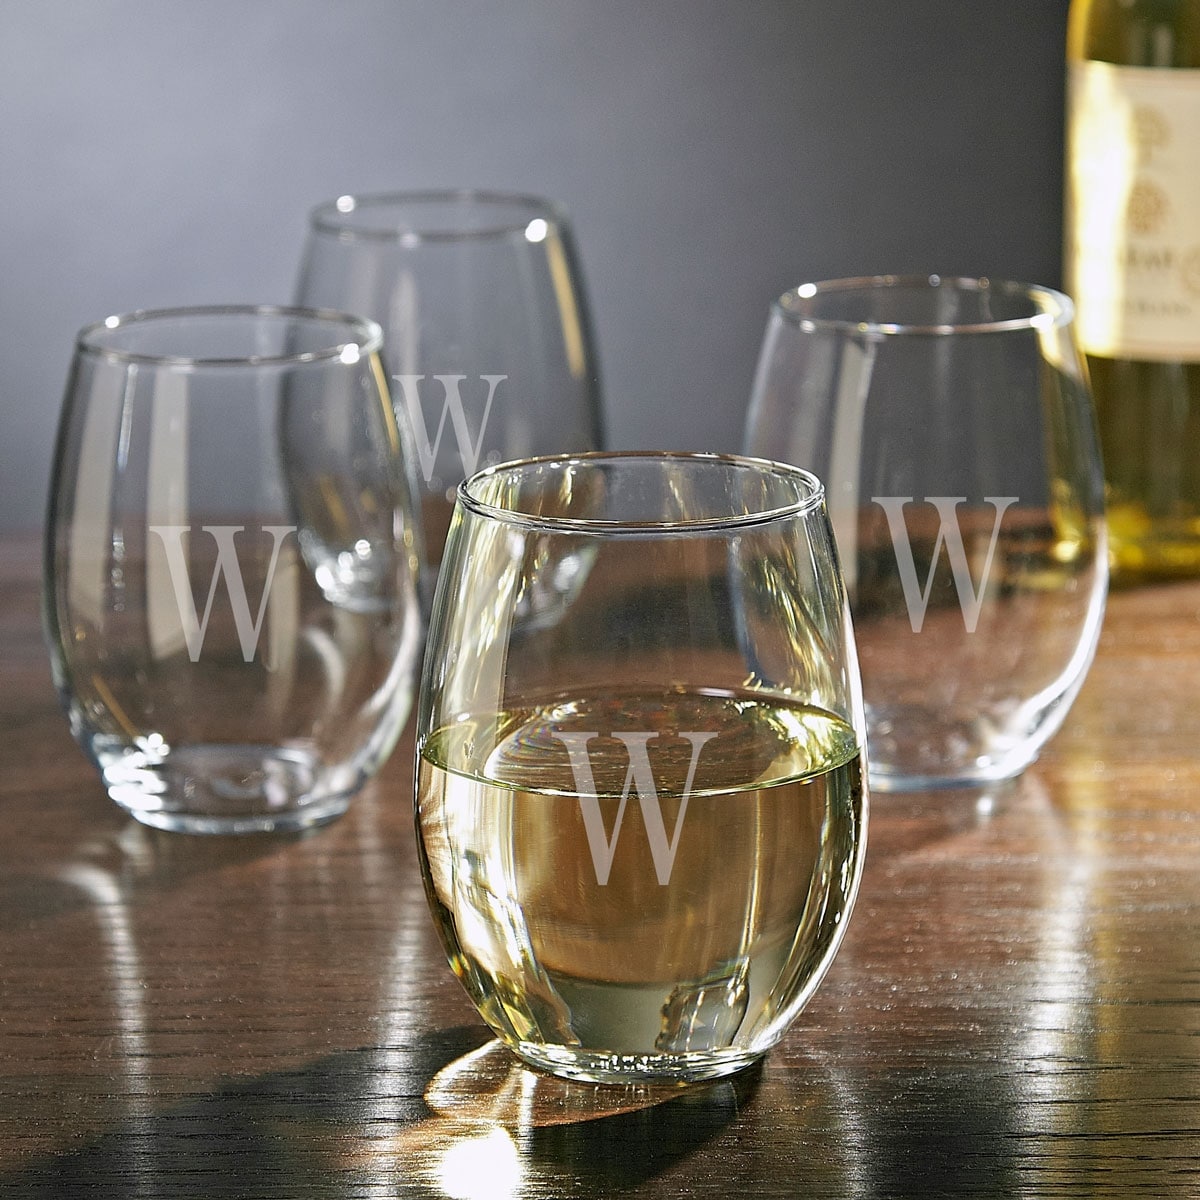 Riedel Colored Stemless Wine Glasses, set/4, etched